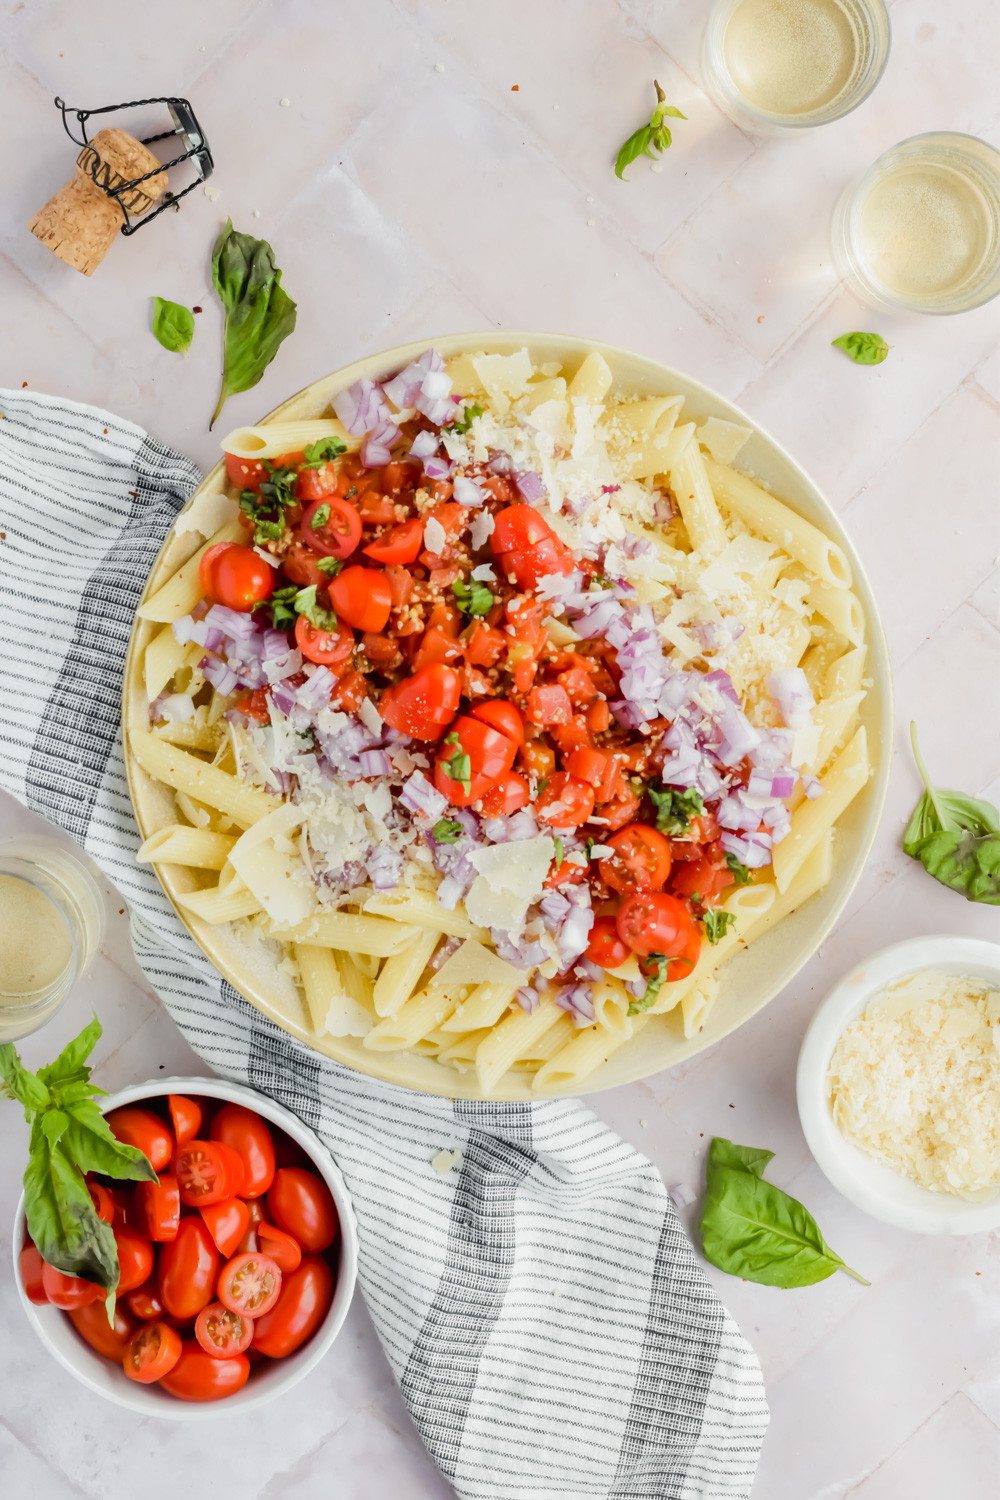 penne pasta topped with bruschetta ingredients before tossing to make pasta salad with additional recipe ingredients surrounding bowl on white background.